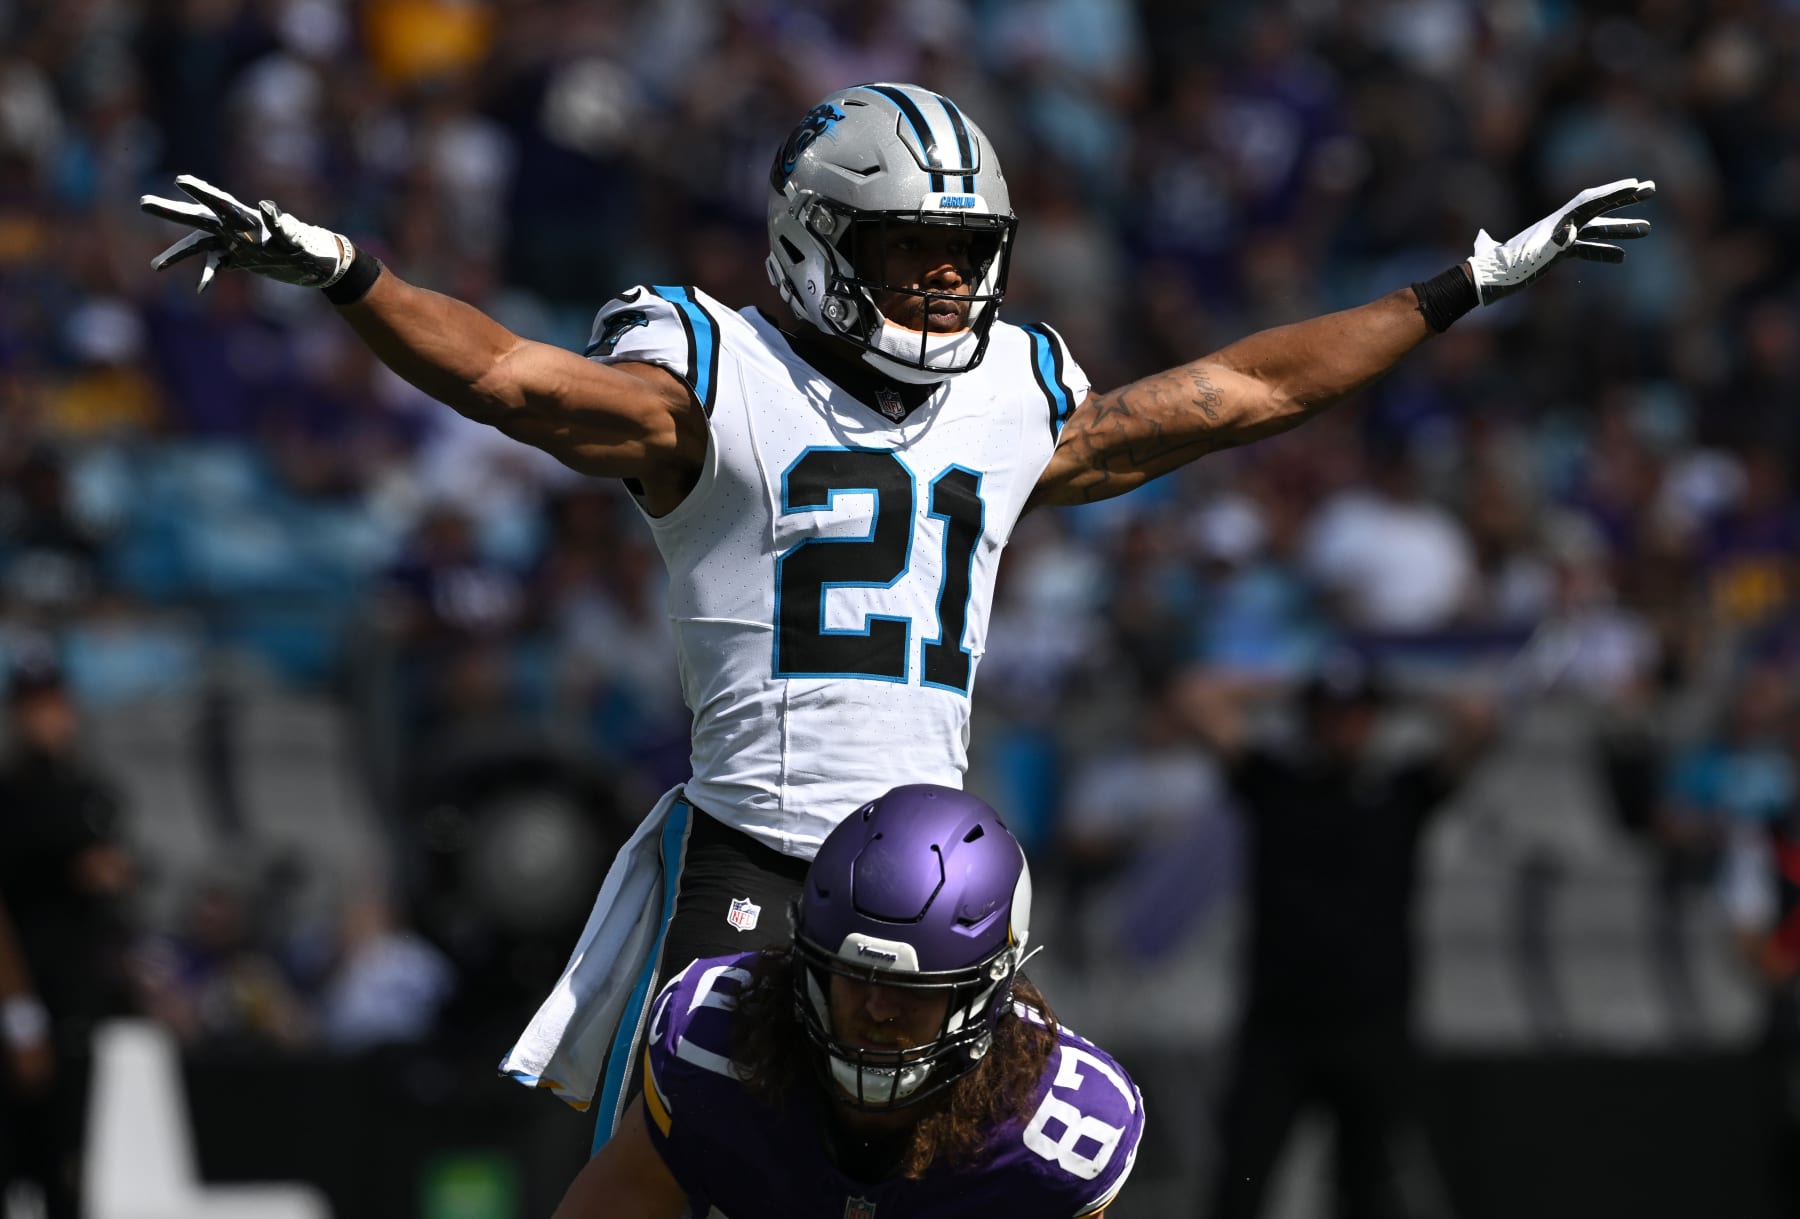 Is trading Brian Burns worth the Carolina Panthers owning a first-round  pick in 2024?